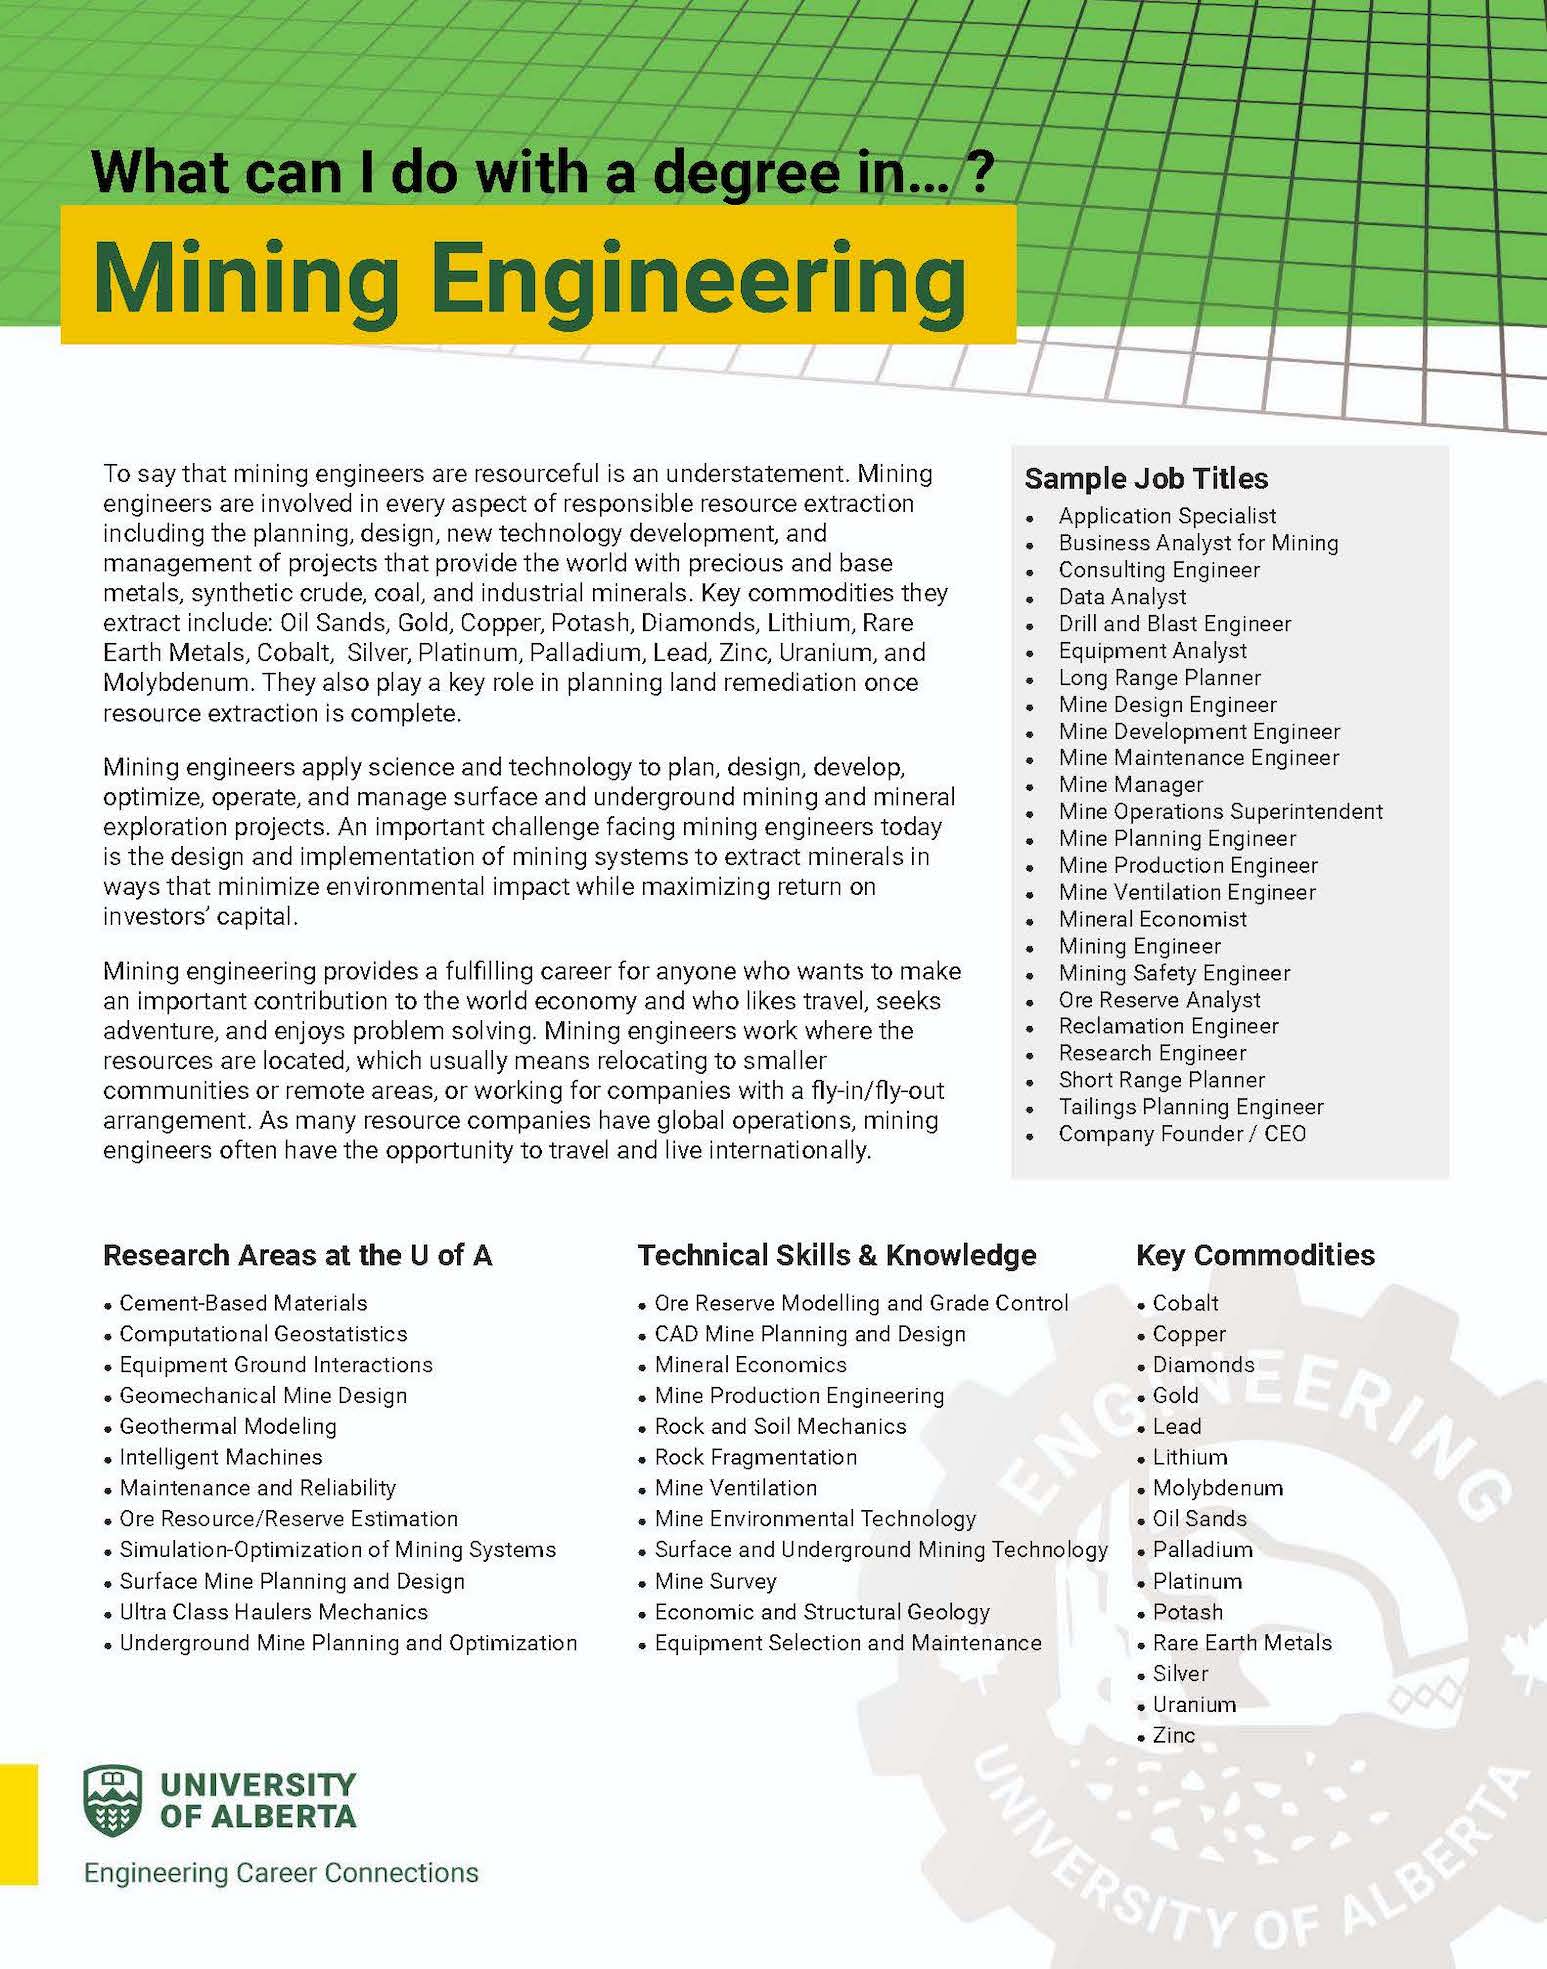 Screenshot of the "What Can I Do With A Degree in Mining Engineering?” Handout. The image links to the handout.